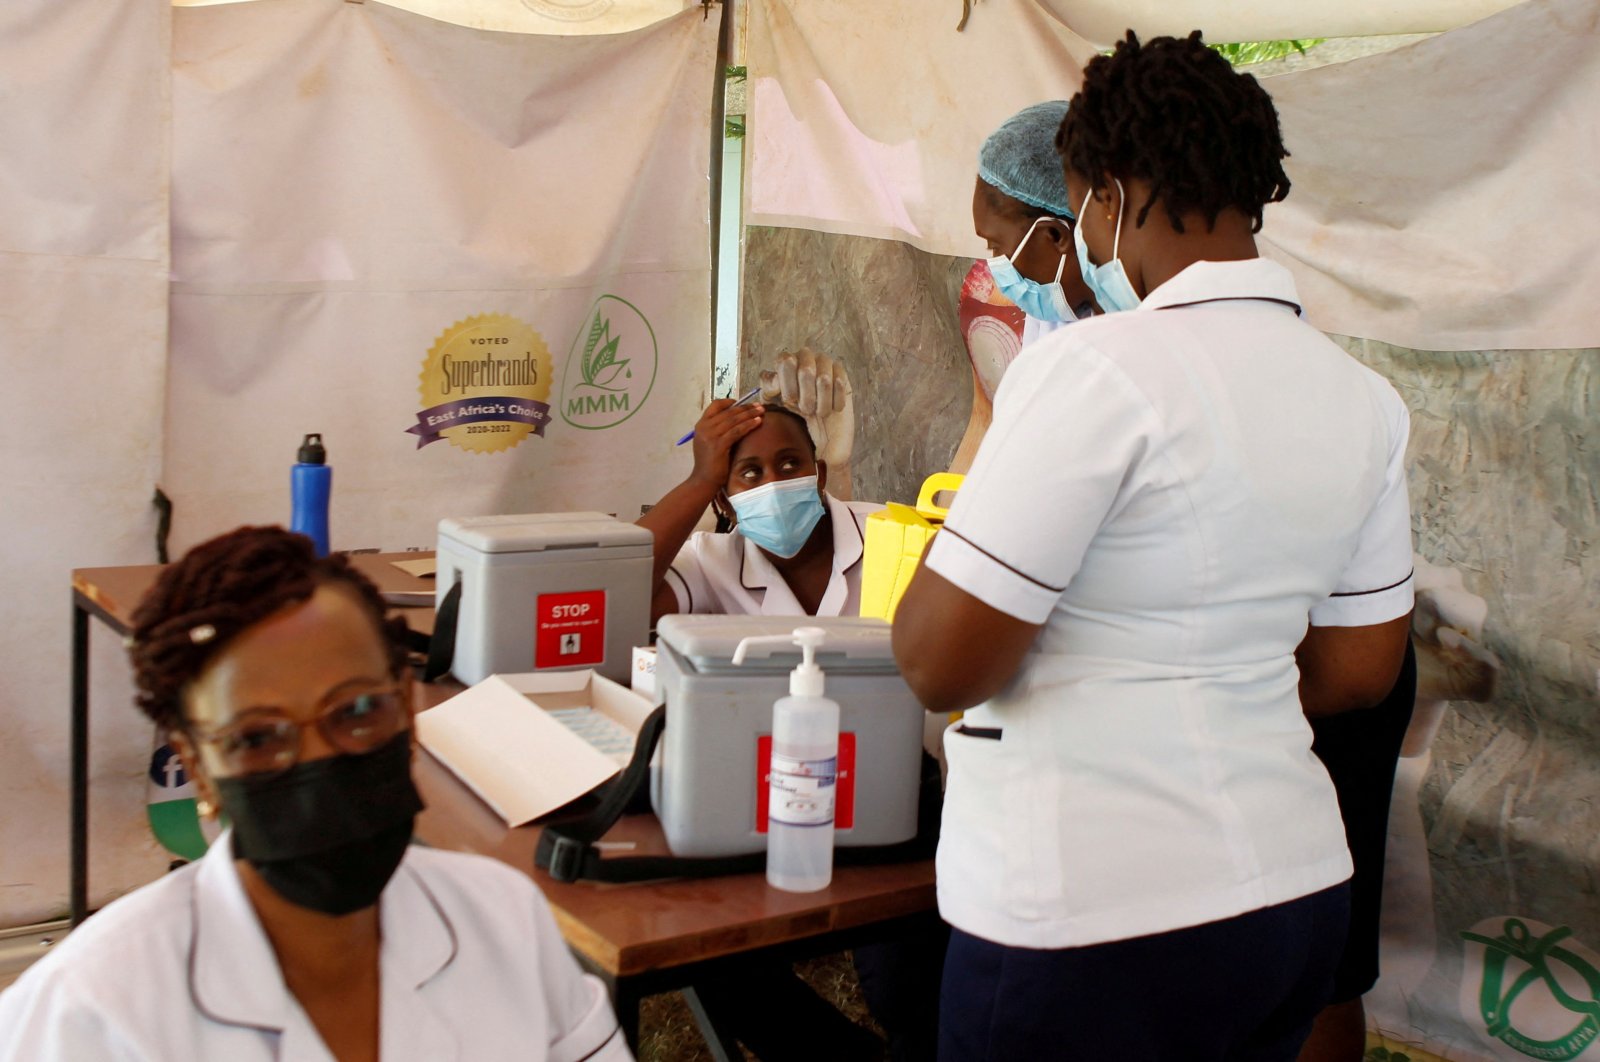 A health worker waits to get a booster shot vaccine against COVID-19 in a makeshift tent at a medical clinic in Nairobi, Kenya, Jan. 19, 2022. (REUTERS)